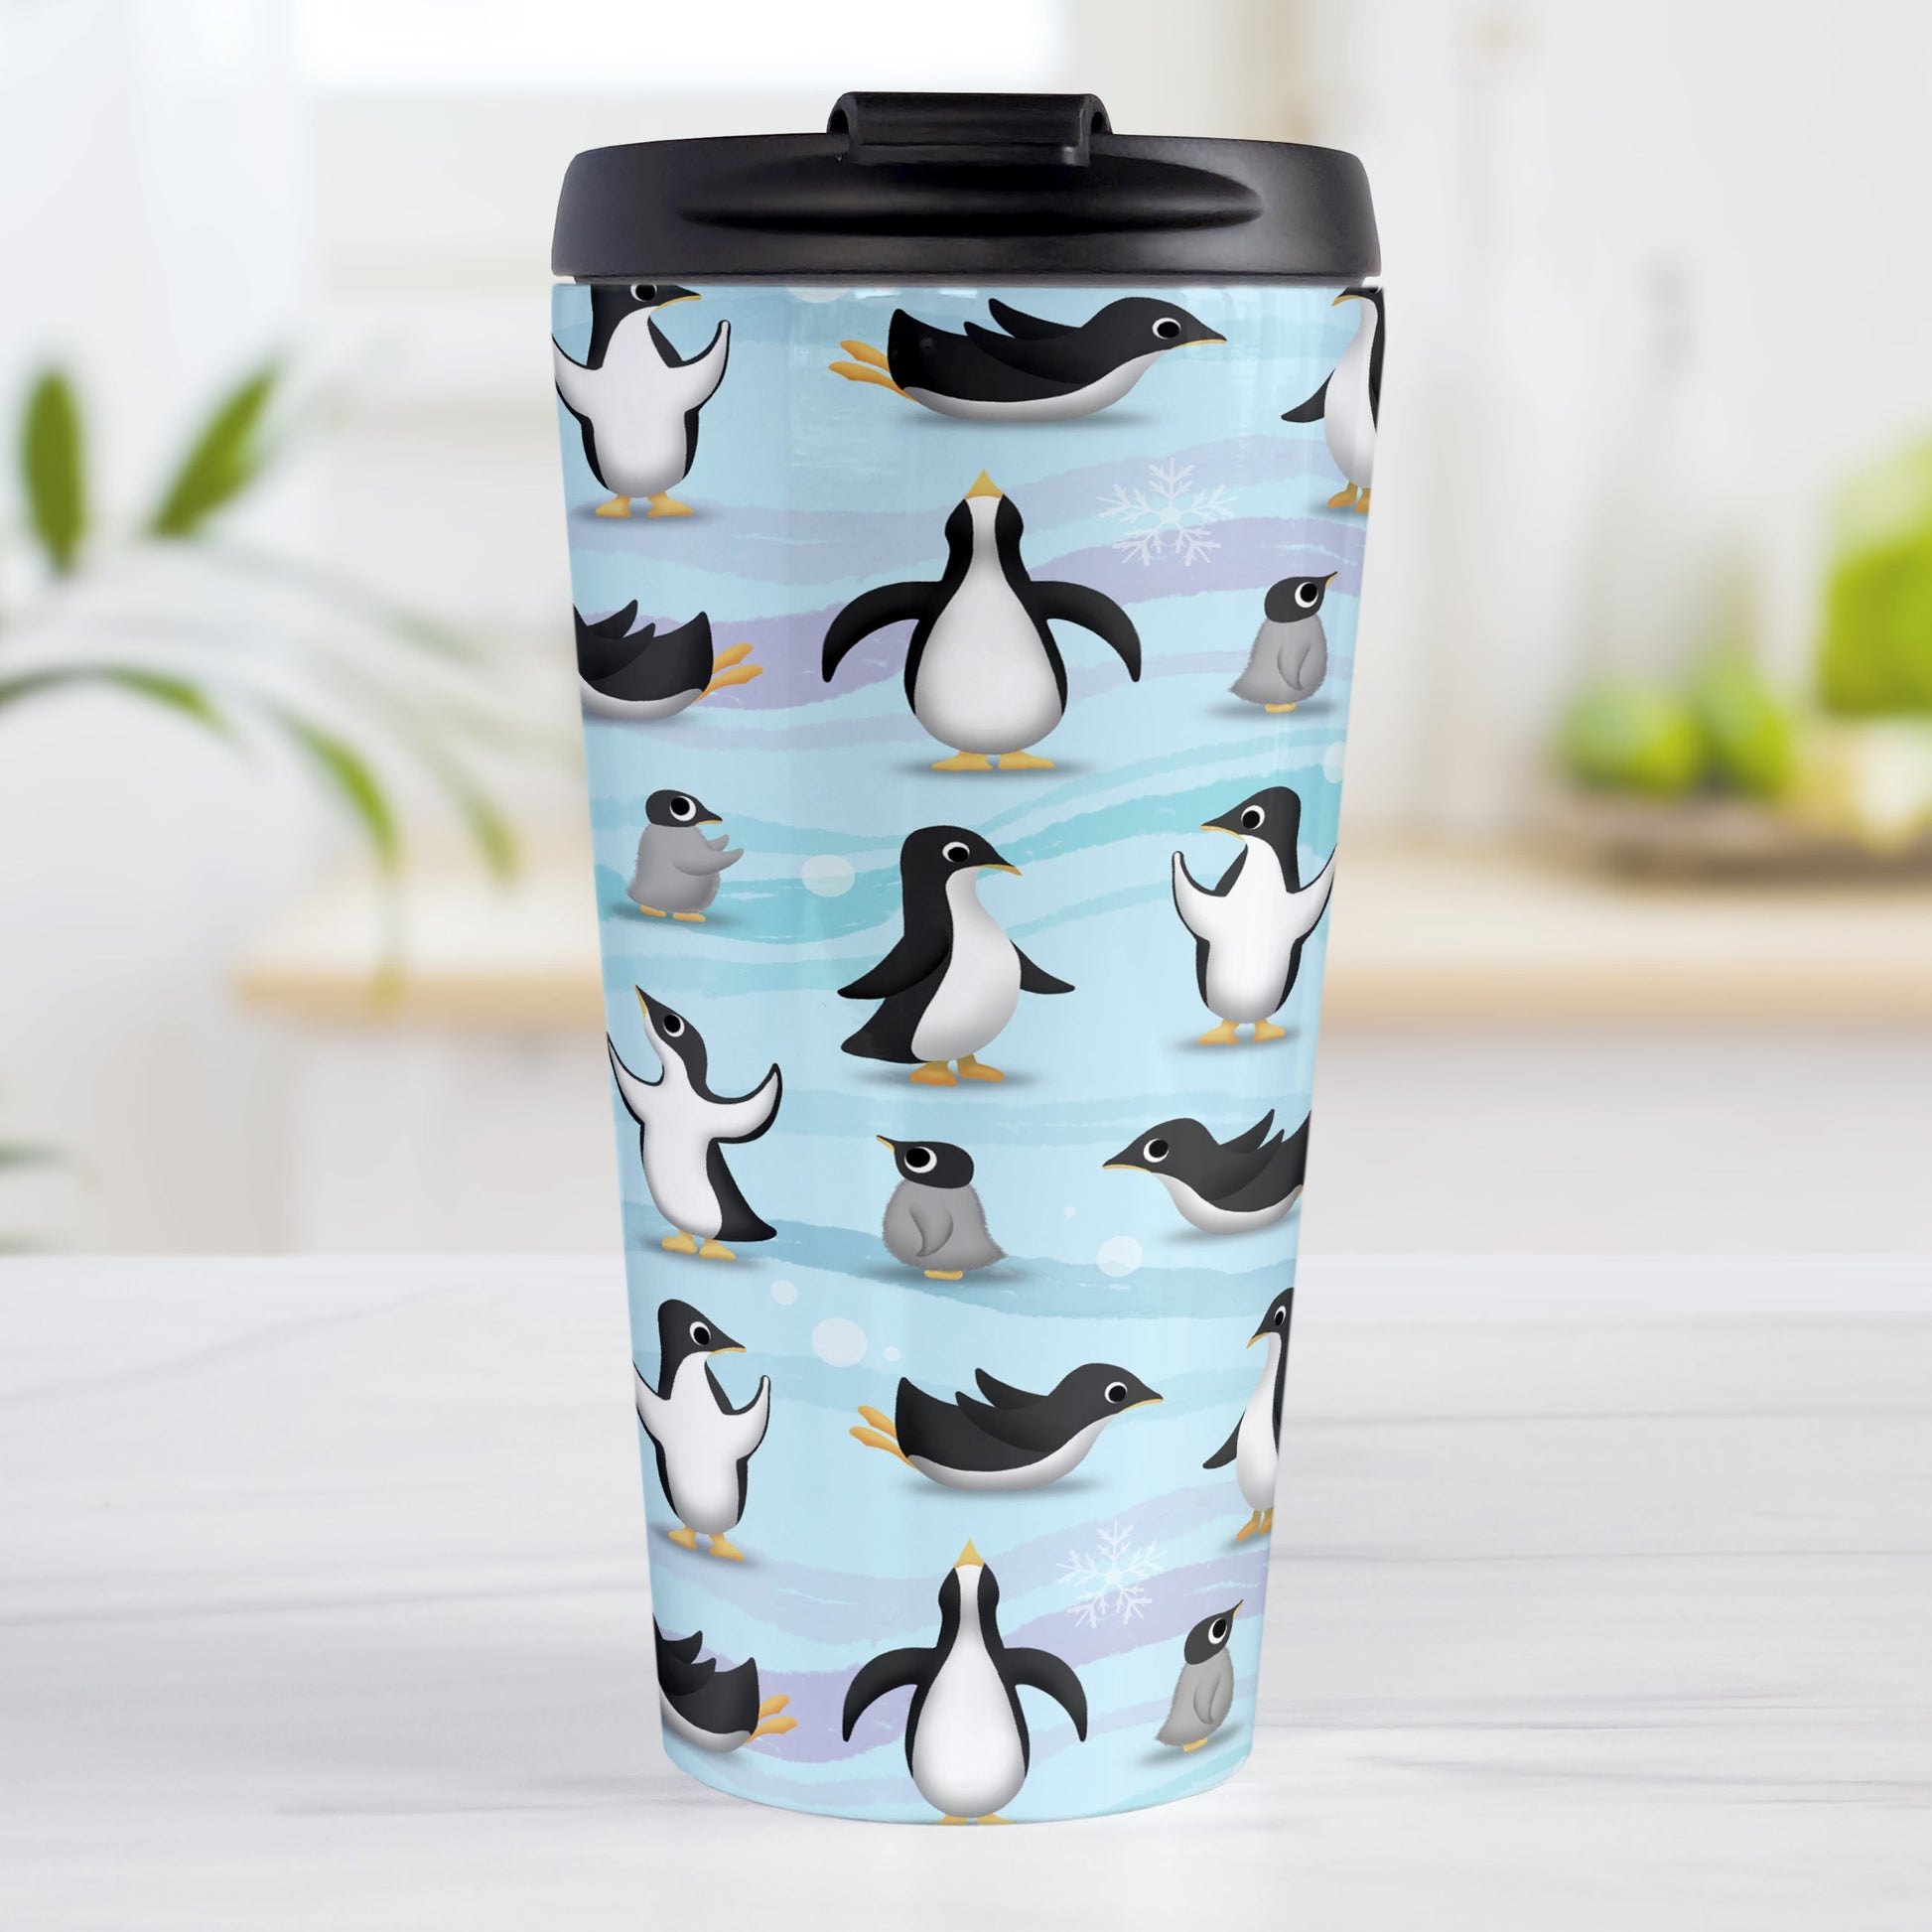 Penguin Parade Pattern Travel Mug (15oz, stainless steel insulated) at Amy's Coffee Mugs